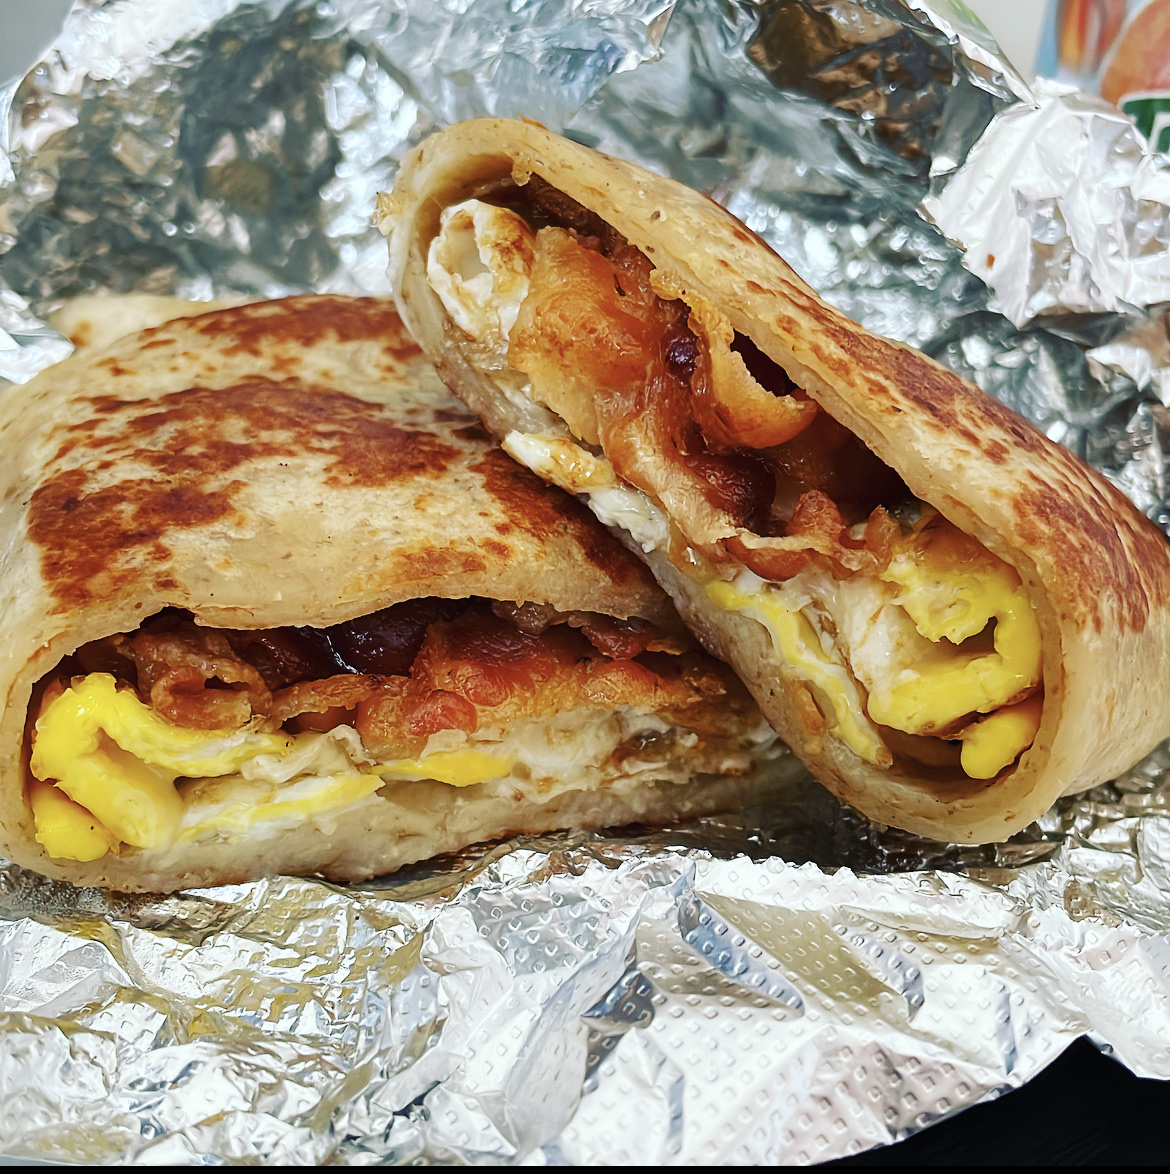 Bacon egg and cheese on a gluten free wrap.